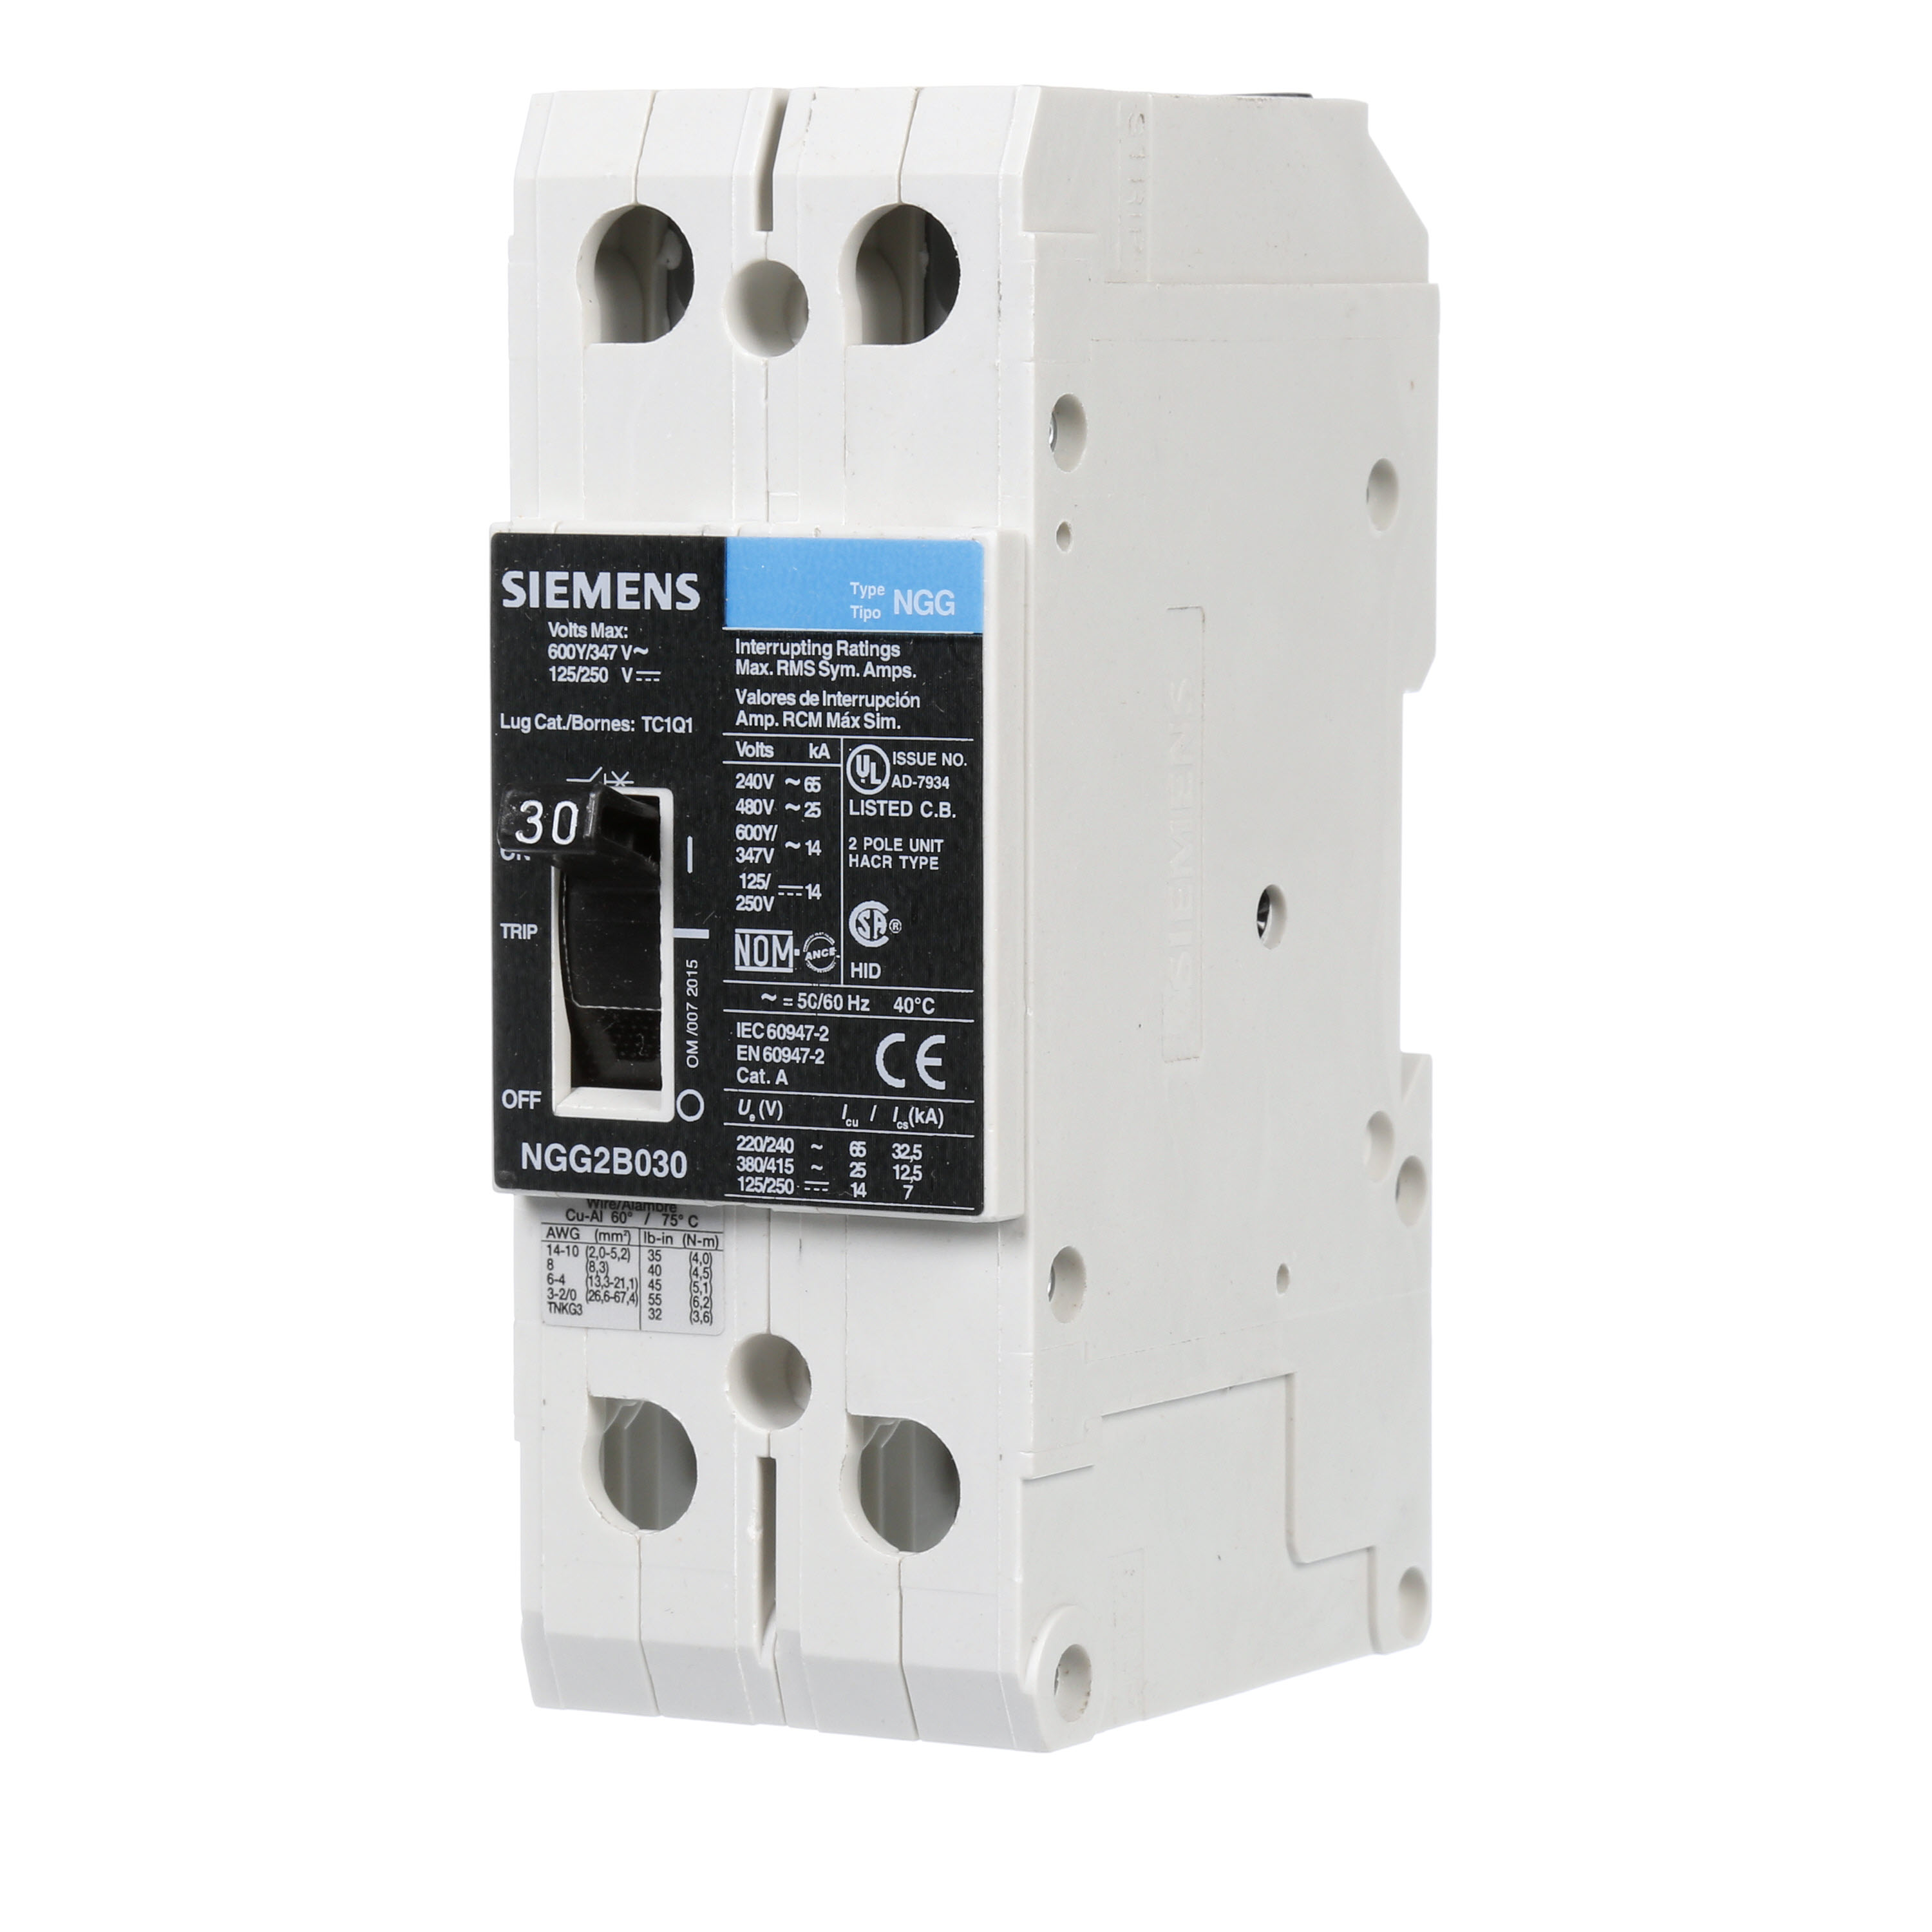 SIEMENS LOW VOLTAGE G FRAME CIRCUIT BREAKER WITH THERMAL - MAGNETIC TRIP. UL LISTED NGG FRAME WITH STANDARD BREAKING CAPACITY. 30A 2-POLE (14KAIC AT 600Y/347V)(25KAIC AT 480V). SPECIAL FEATURES MOUNTS ON DIN RAIL / SCREW, LINE AND LOAD SIDE LUGS (TC1Q1) WIRE RANGE 14 - 10 AWS (CU/AL). DIMENSIONS (W x H x D) IN 2 x 5.4 x 2.8.